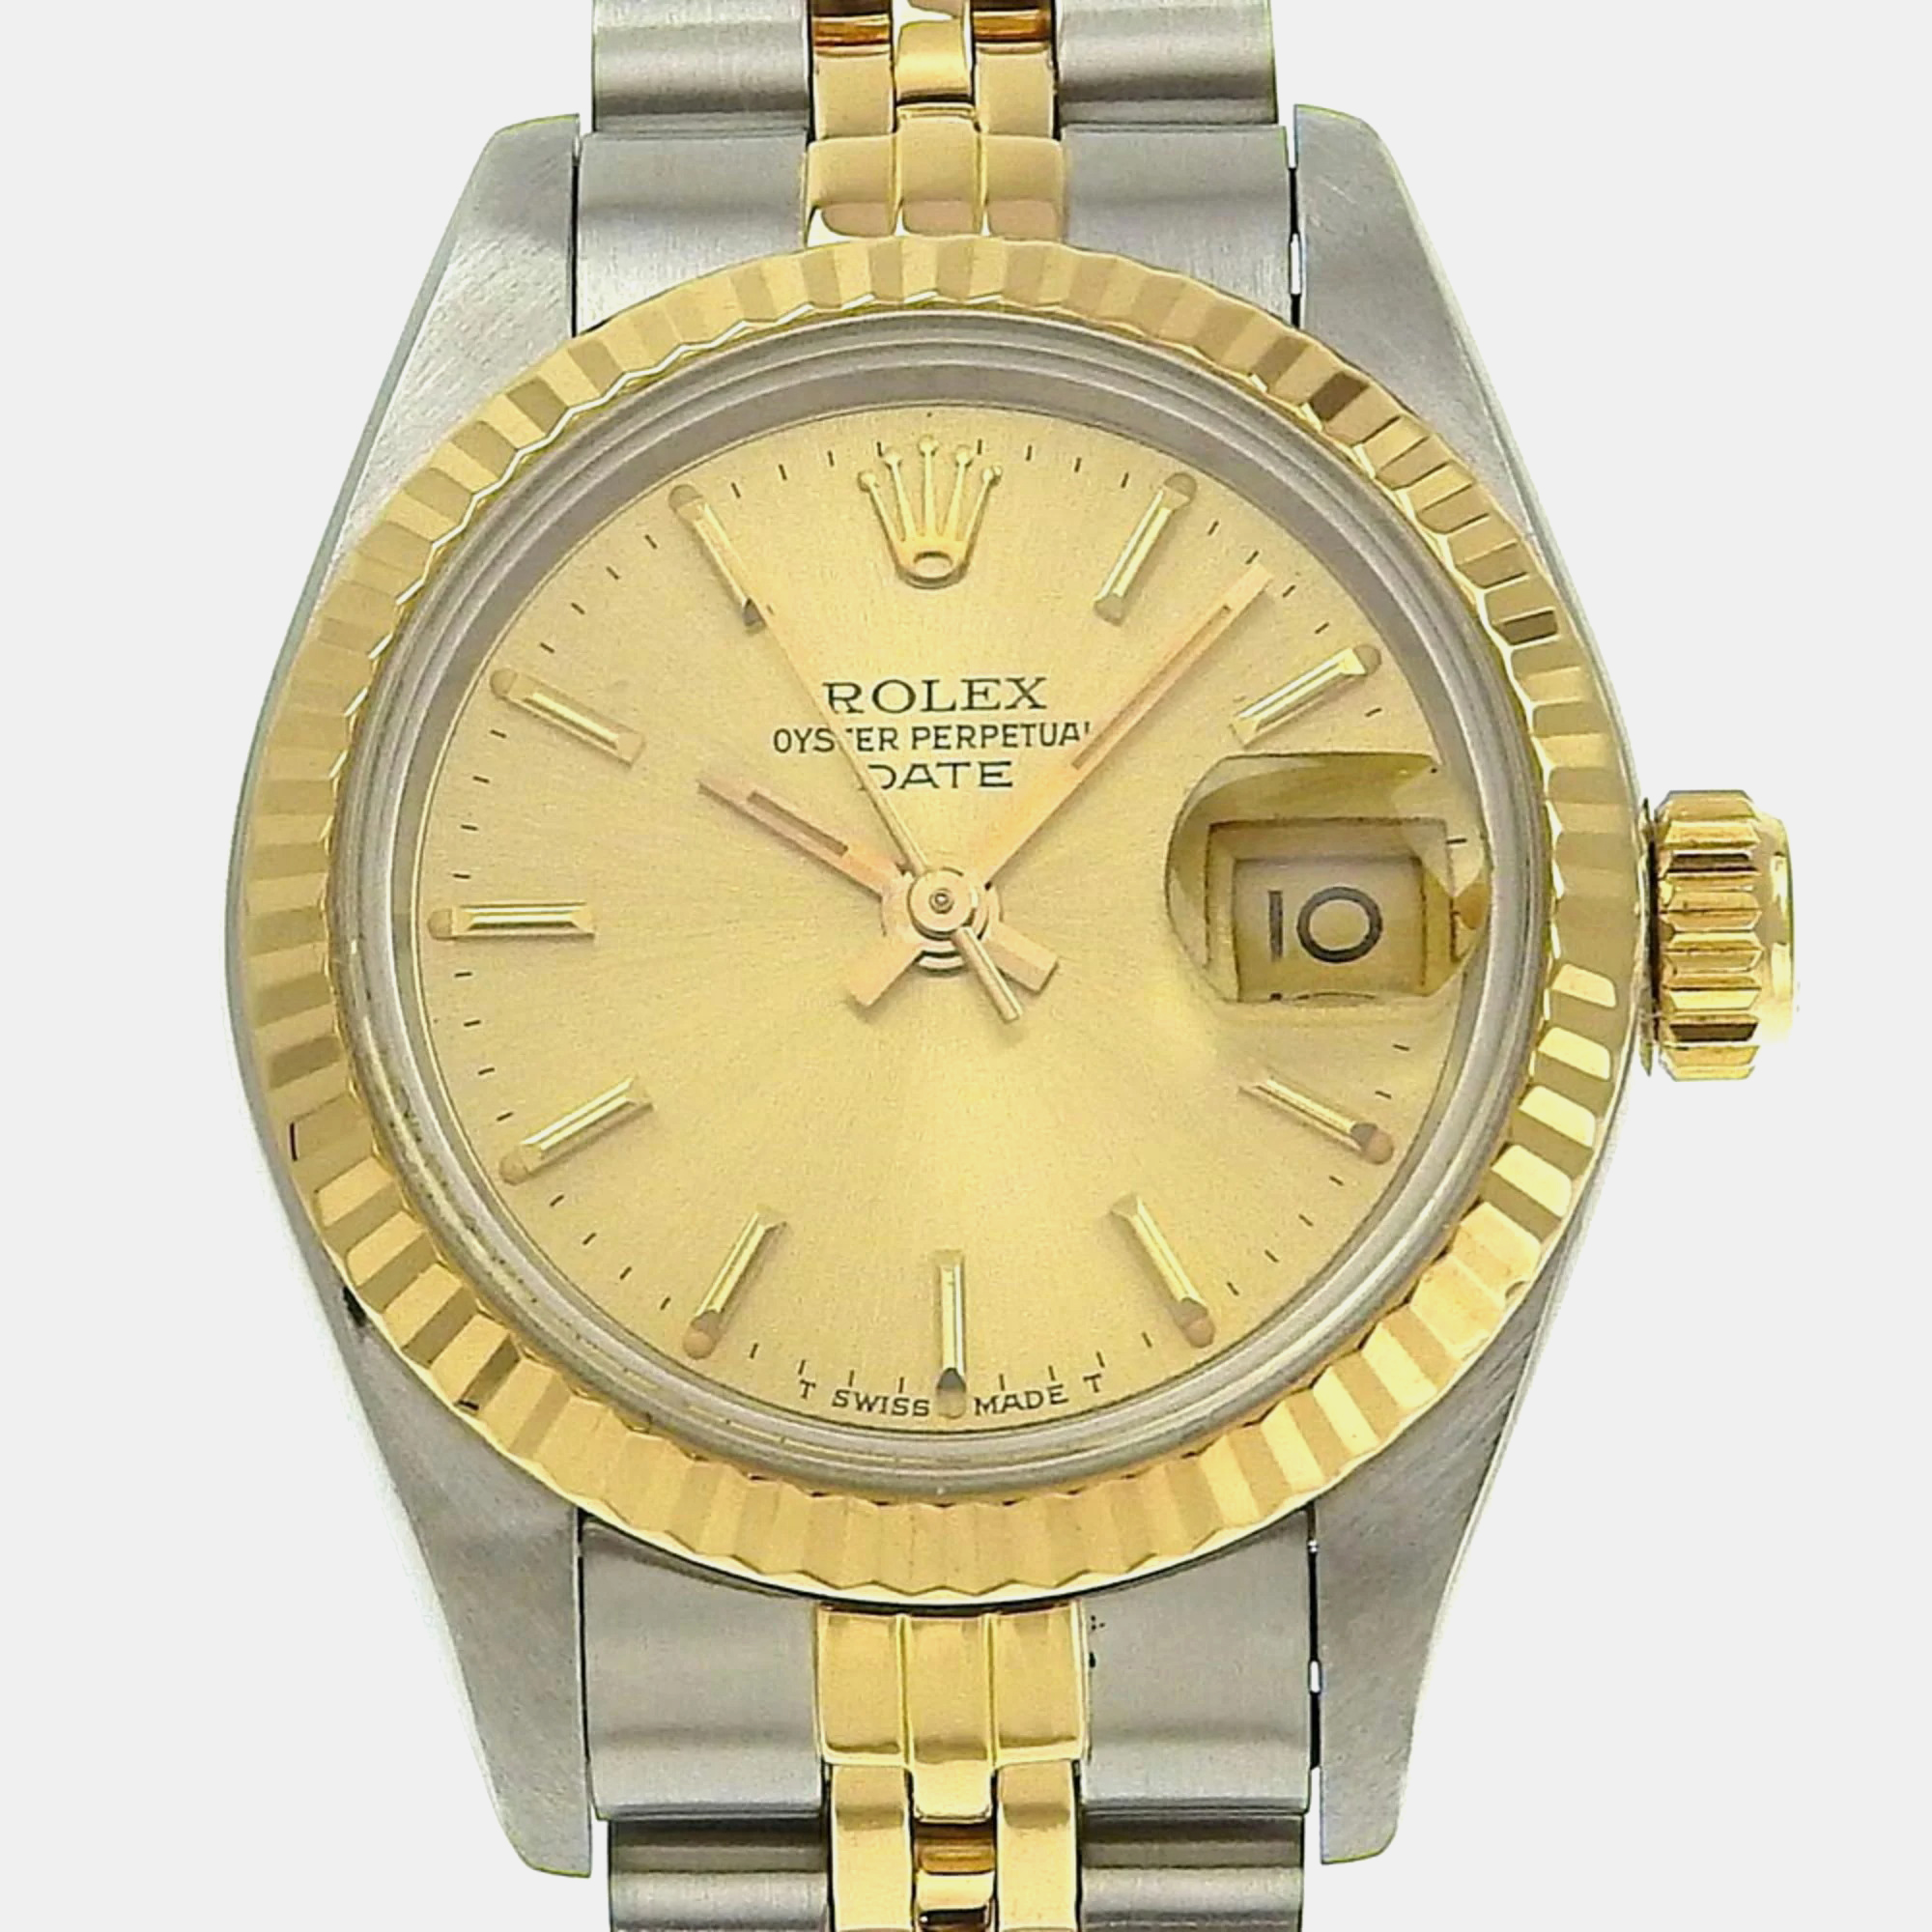 Rolex champagne 18k yellow gold stainless steel datejust 69173 automatic women's wristwatch 26 mm